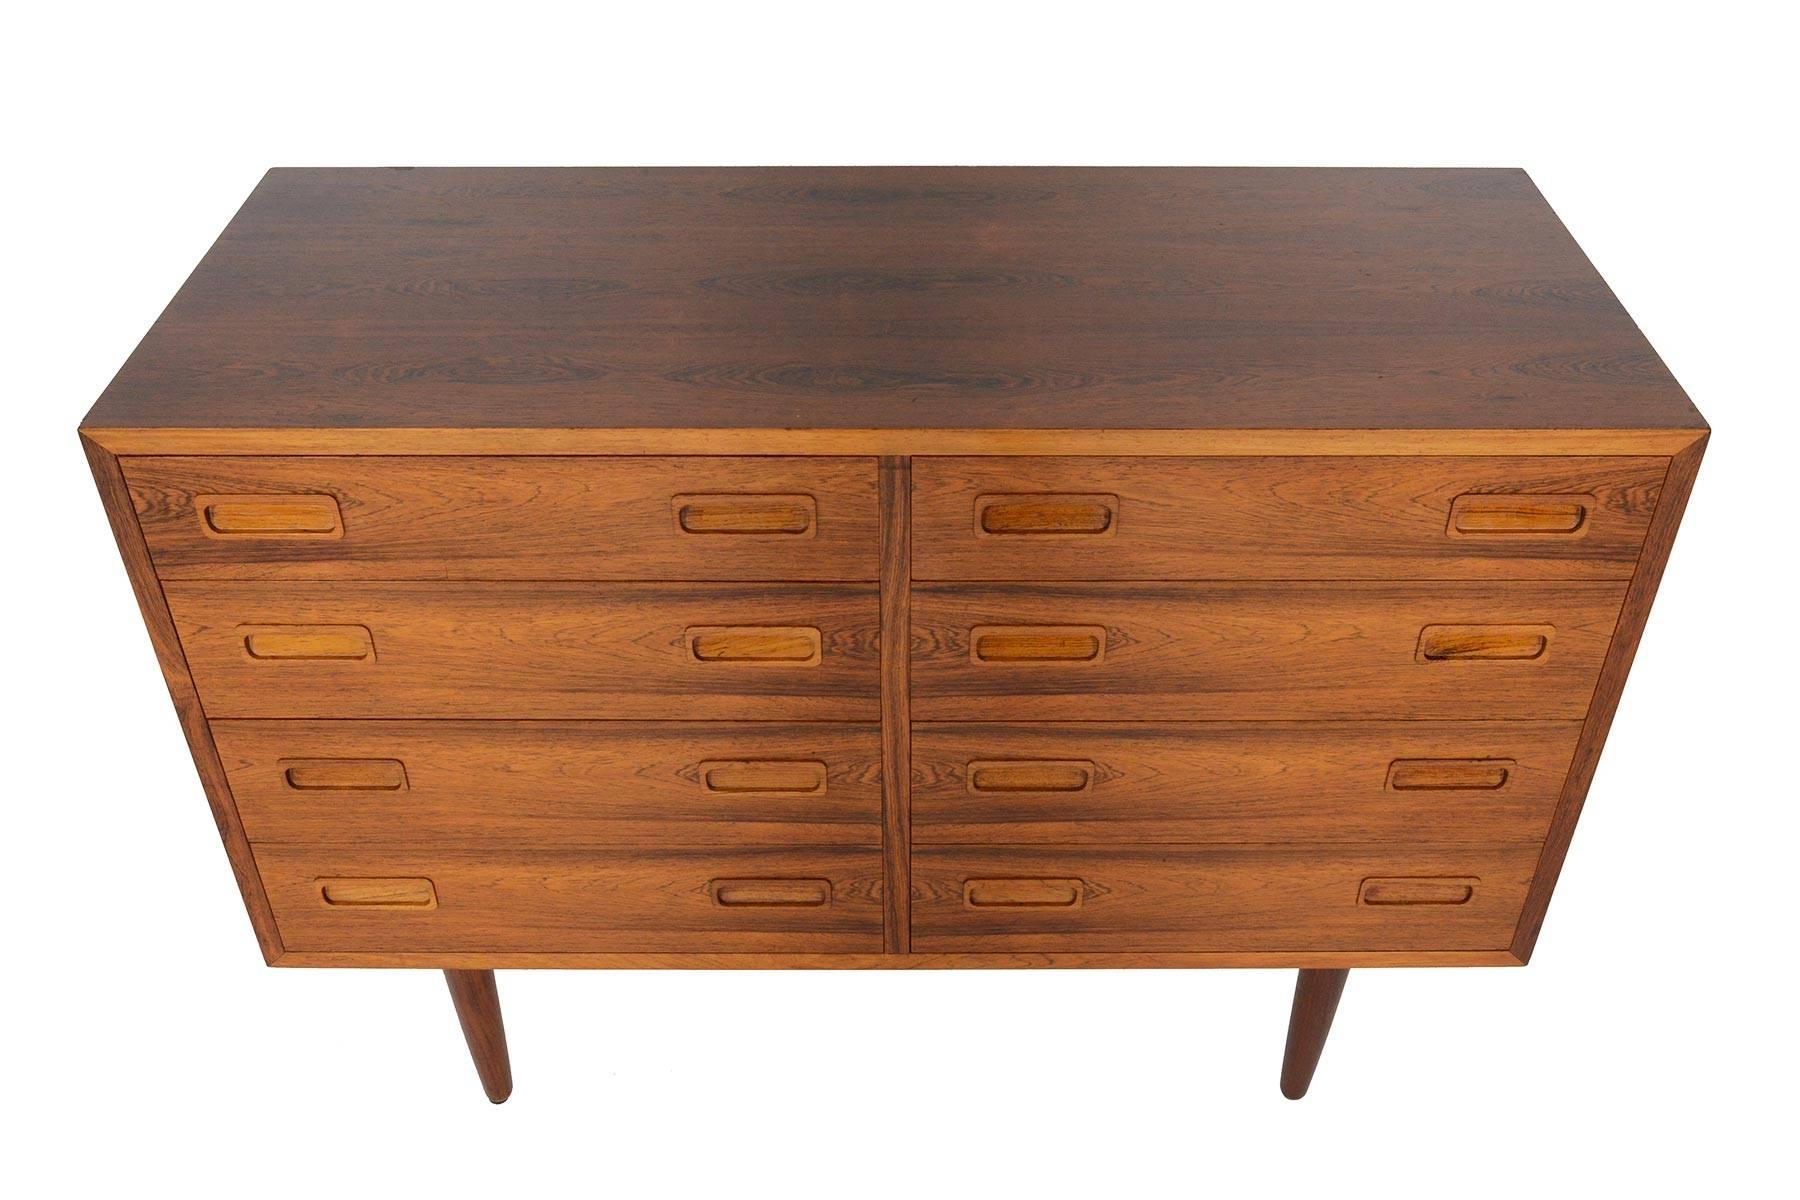 Danish modern midcentury low eight-drawer double dresser in Brazilian rosewood.  hand-carved rosewood drawer pulls accent the excellent yet understated craftsmanship of this Classic piece.  Manufactured by Hundevad & Co in the 1960s. In excellent